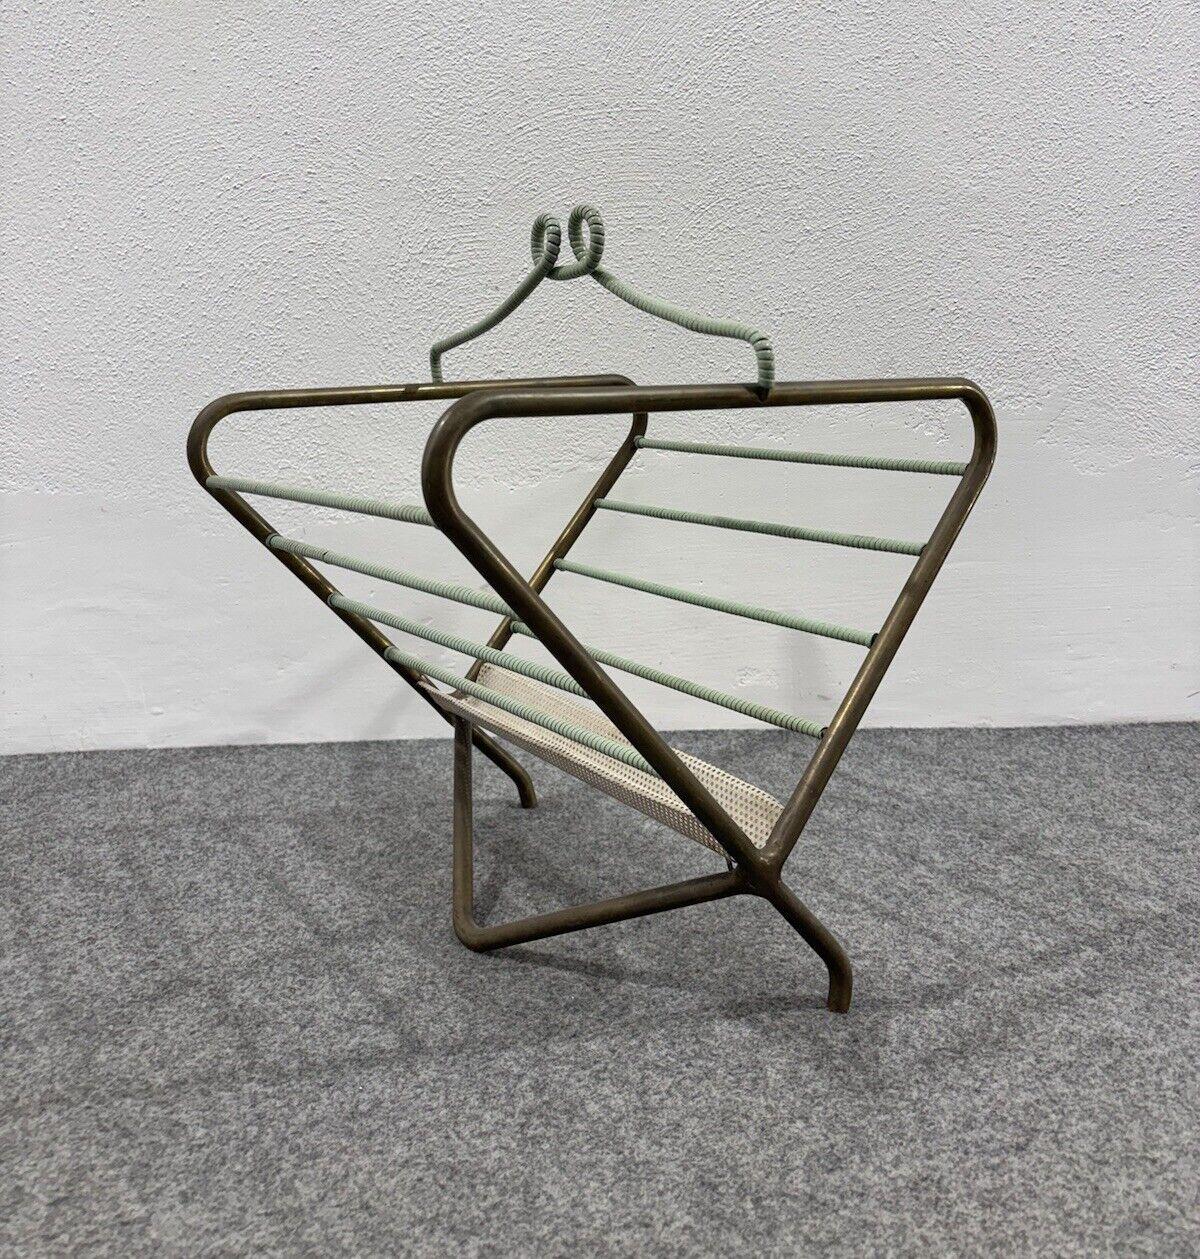 Mathieu Mategot Magazine rack Design Mid-century 1950's Modernism.

Brass frame, enameled metal, and plastic material.

Item in very good conservative condition, no cosmetic or structural defects to report, only slight and obvious signs of time due